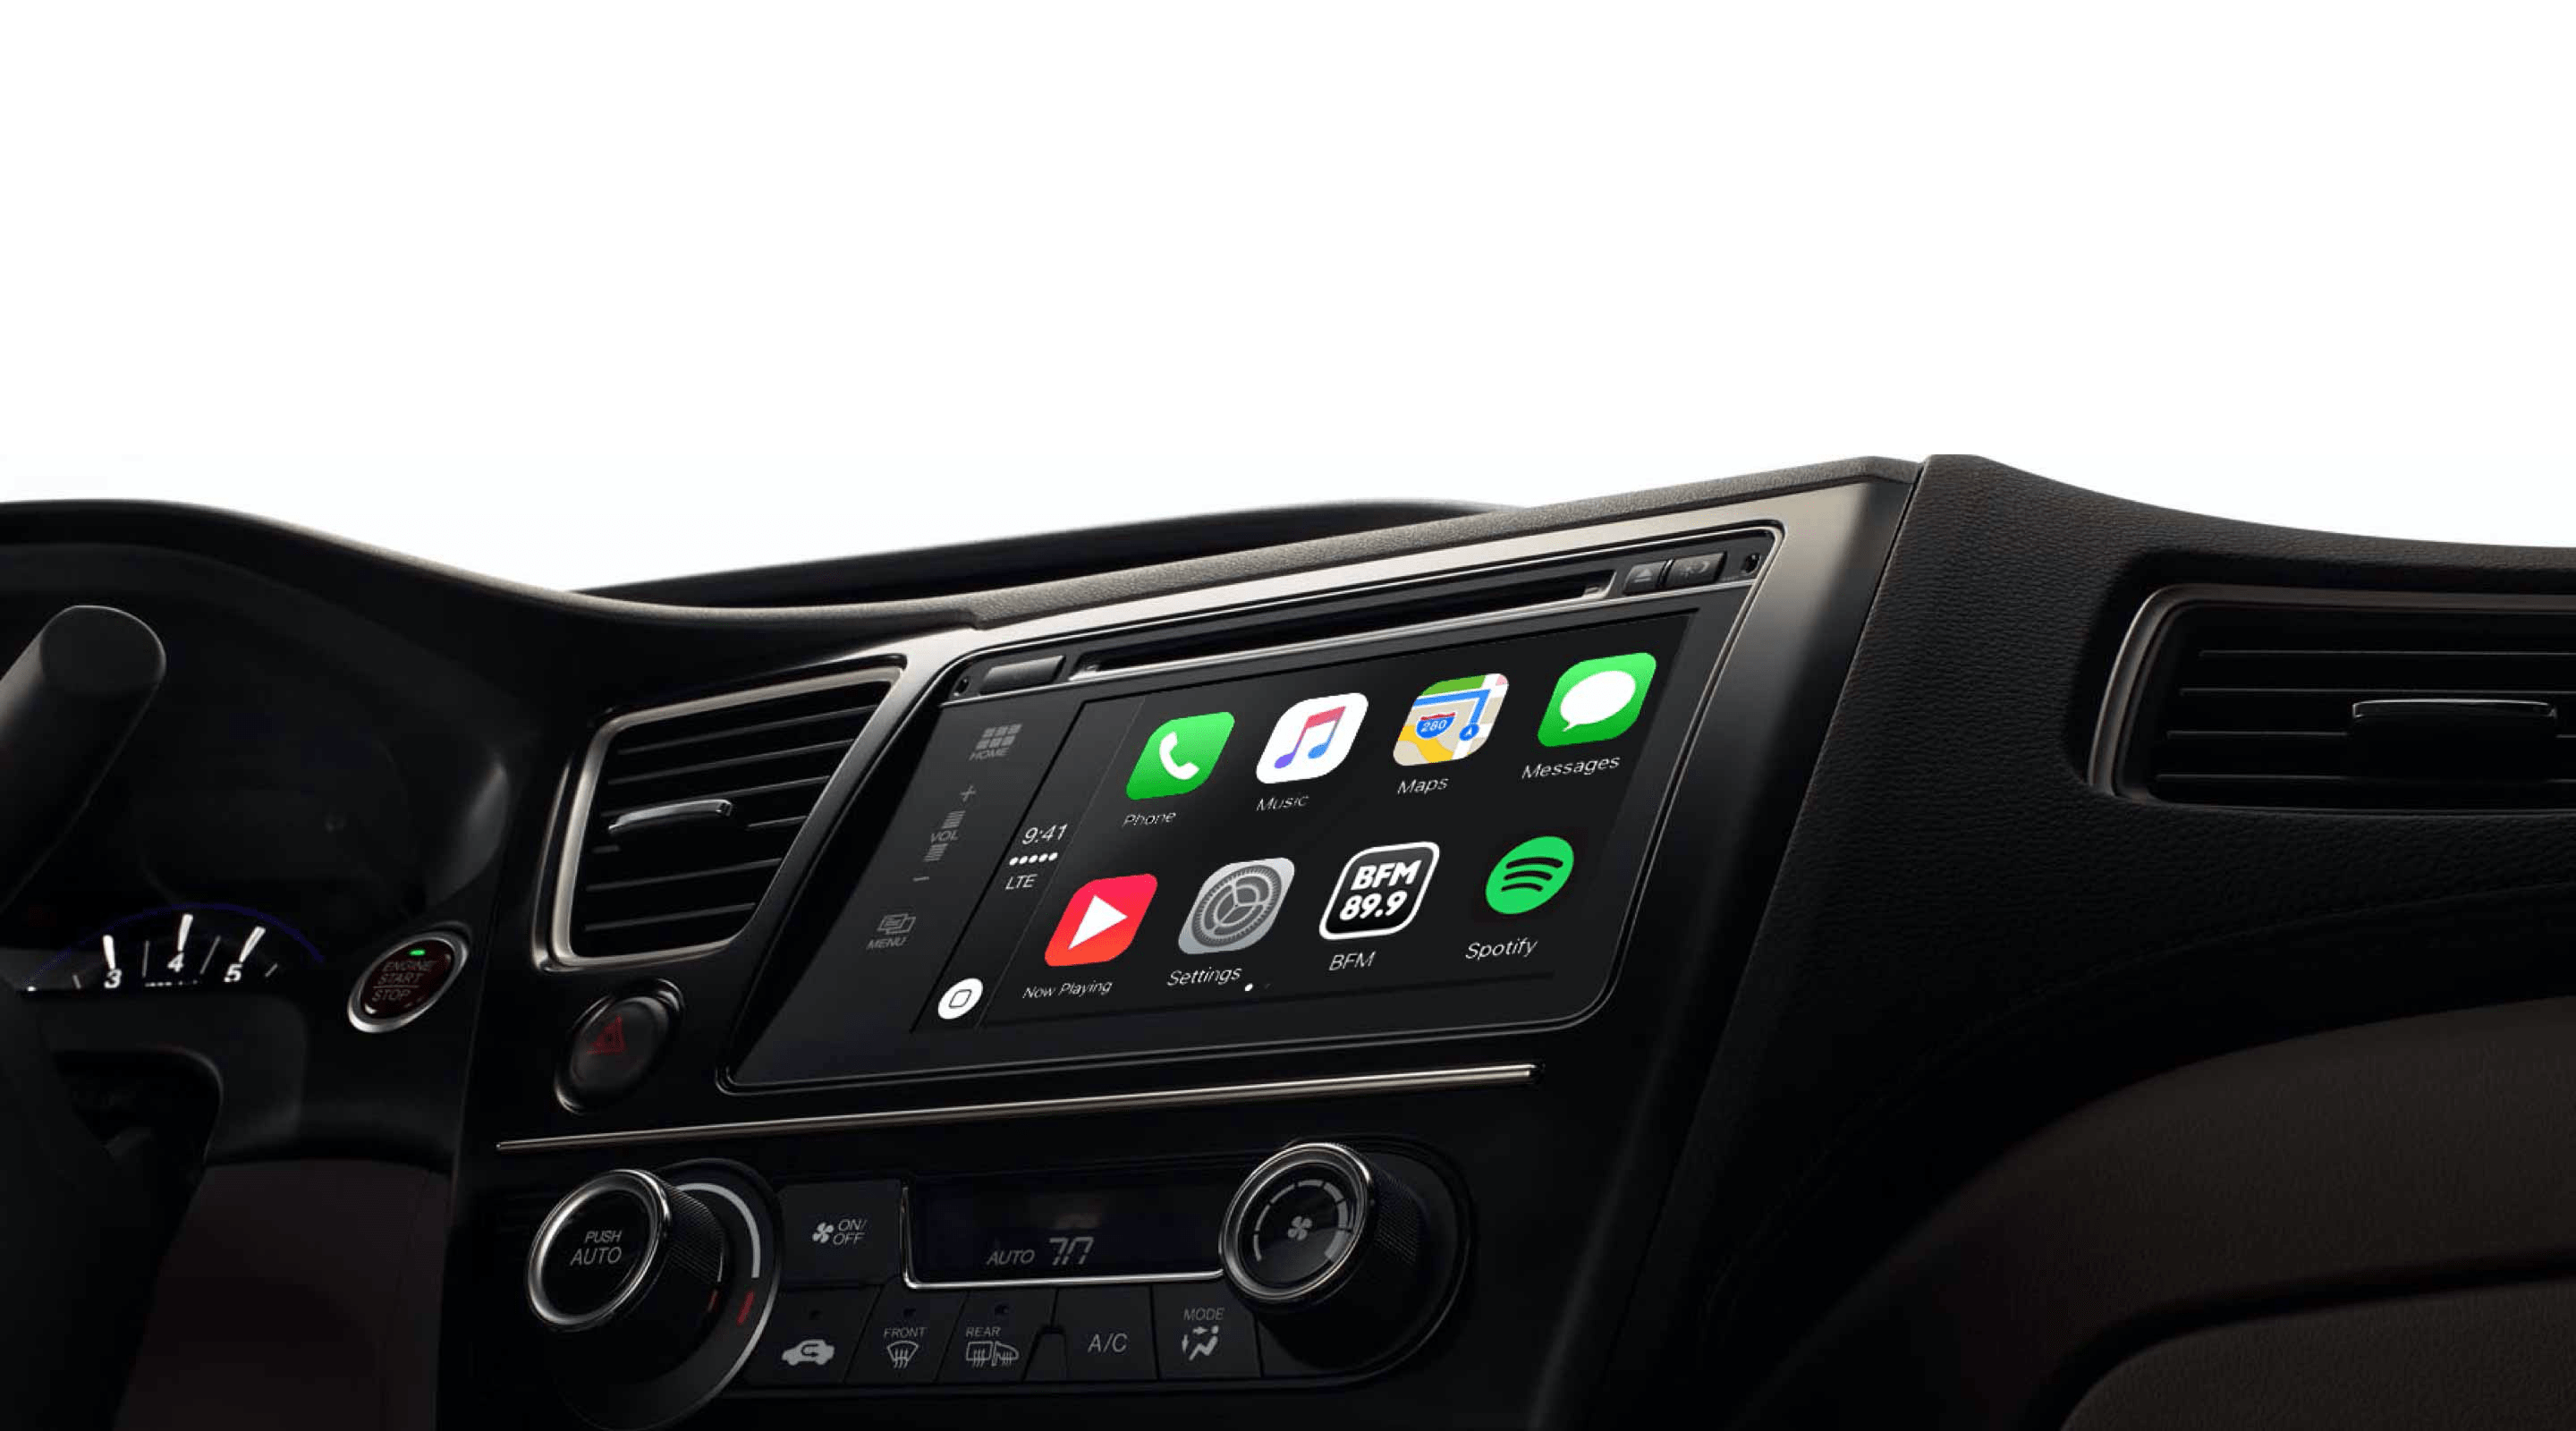 BFM radio app icon on Apple CarPlay home screen displayed in a car infotainment system with a touchscreen built-in display